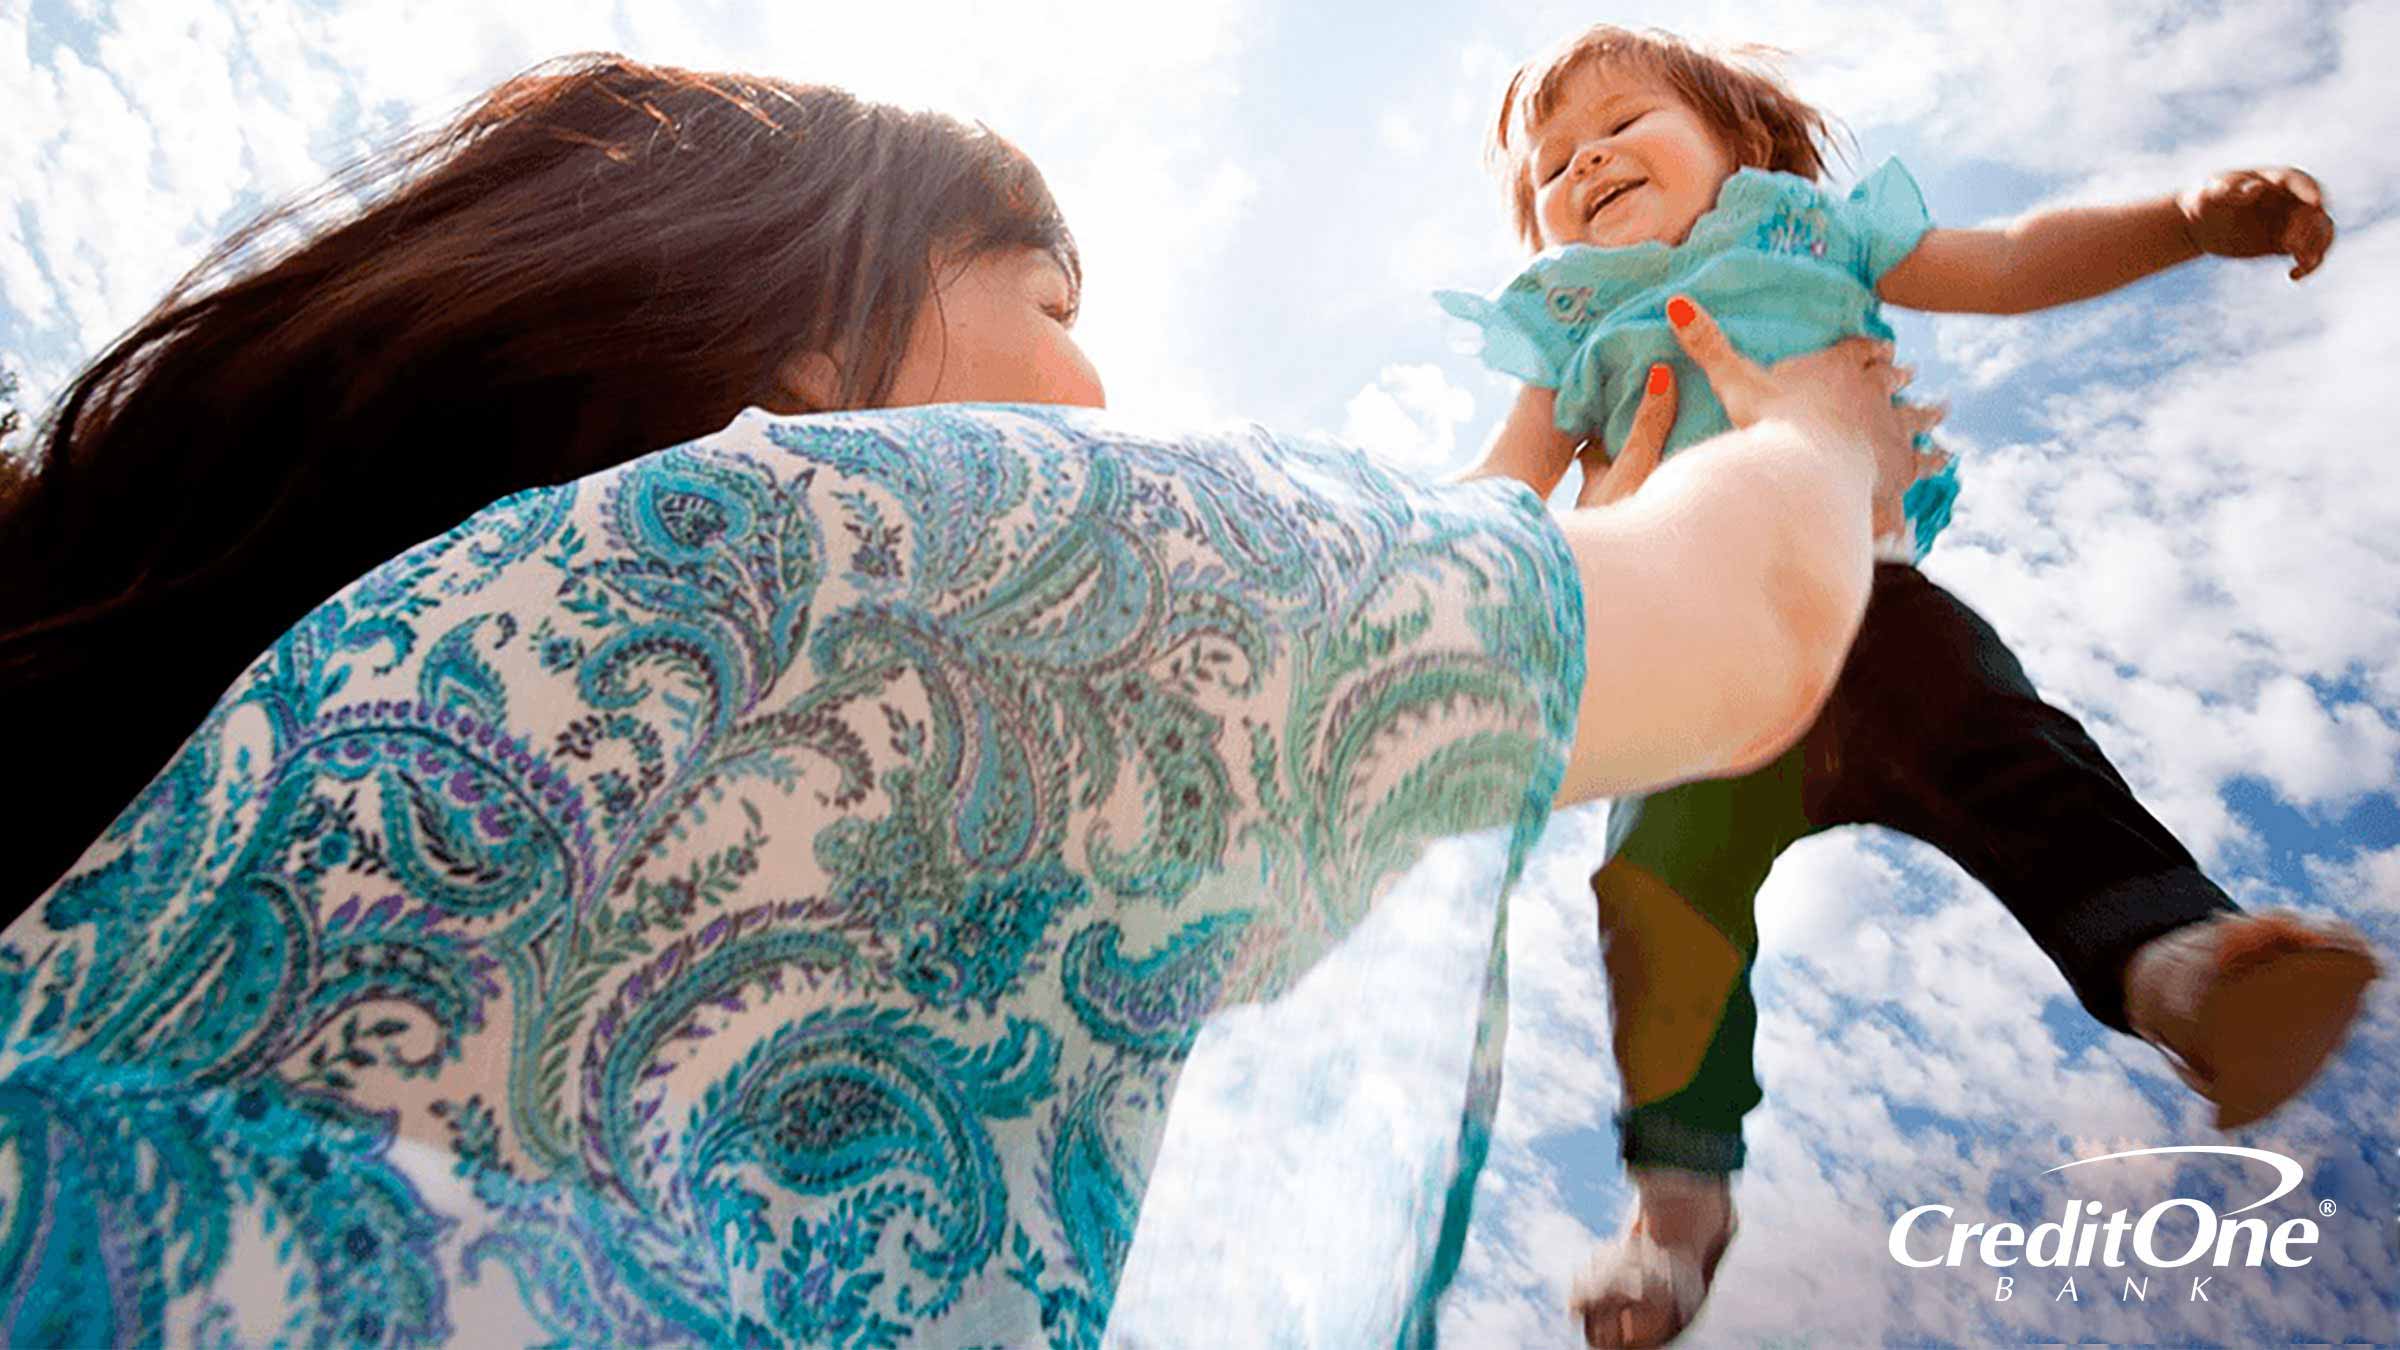 A mom lifts her young child high into the air, representing long-term financial goals for her family.